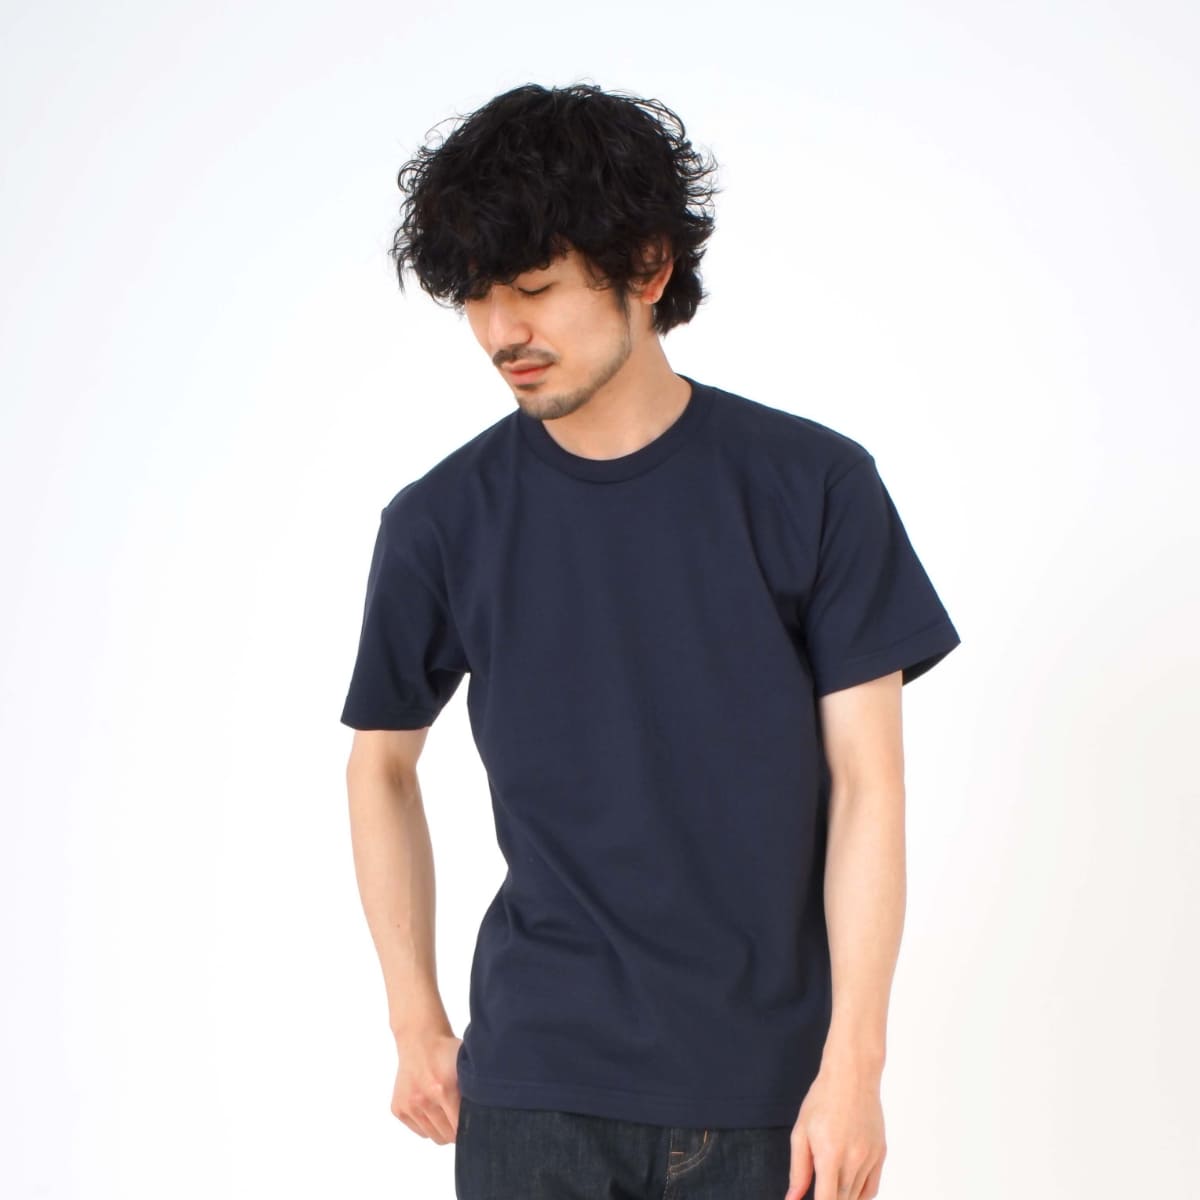 Touch and Go Ｔシャツ | ビッグサイズ | 1枚 | SS1030 | チャコール